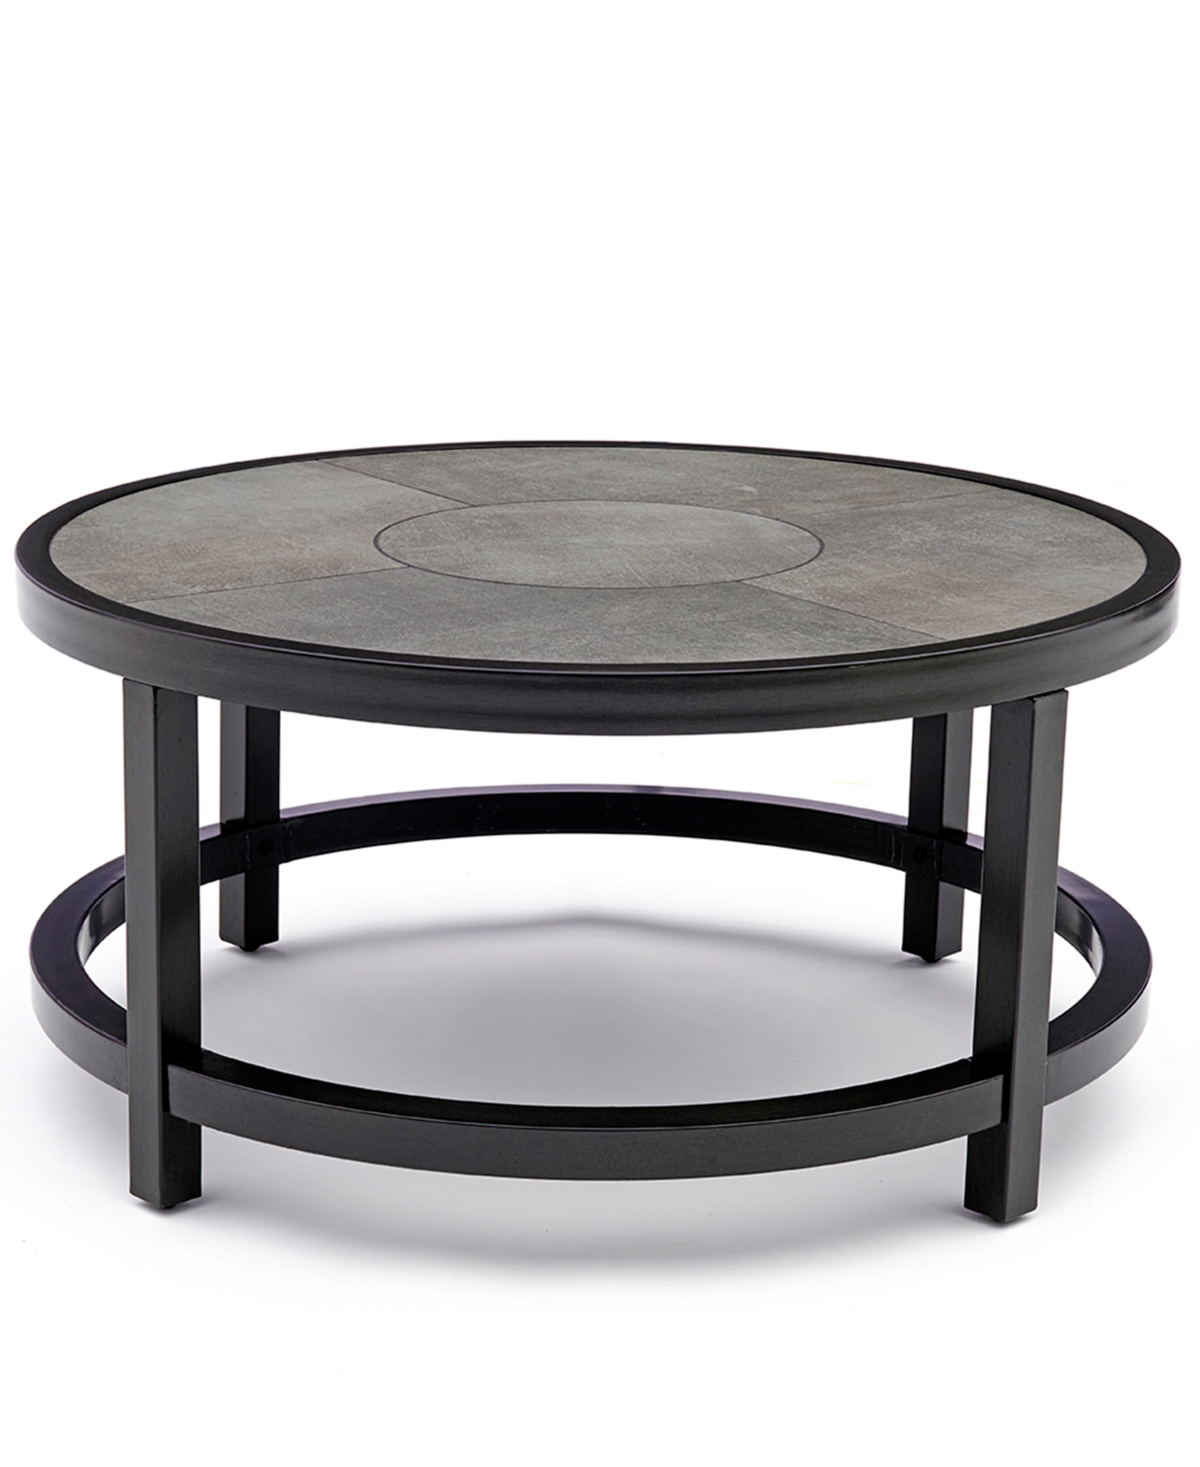 Deco Outdoor 36 Round Coffee Table, Created for Macys